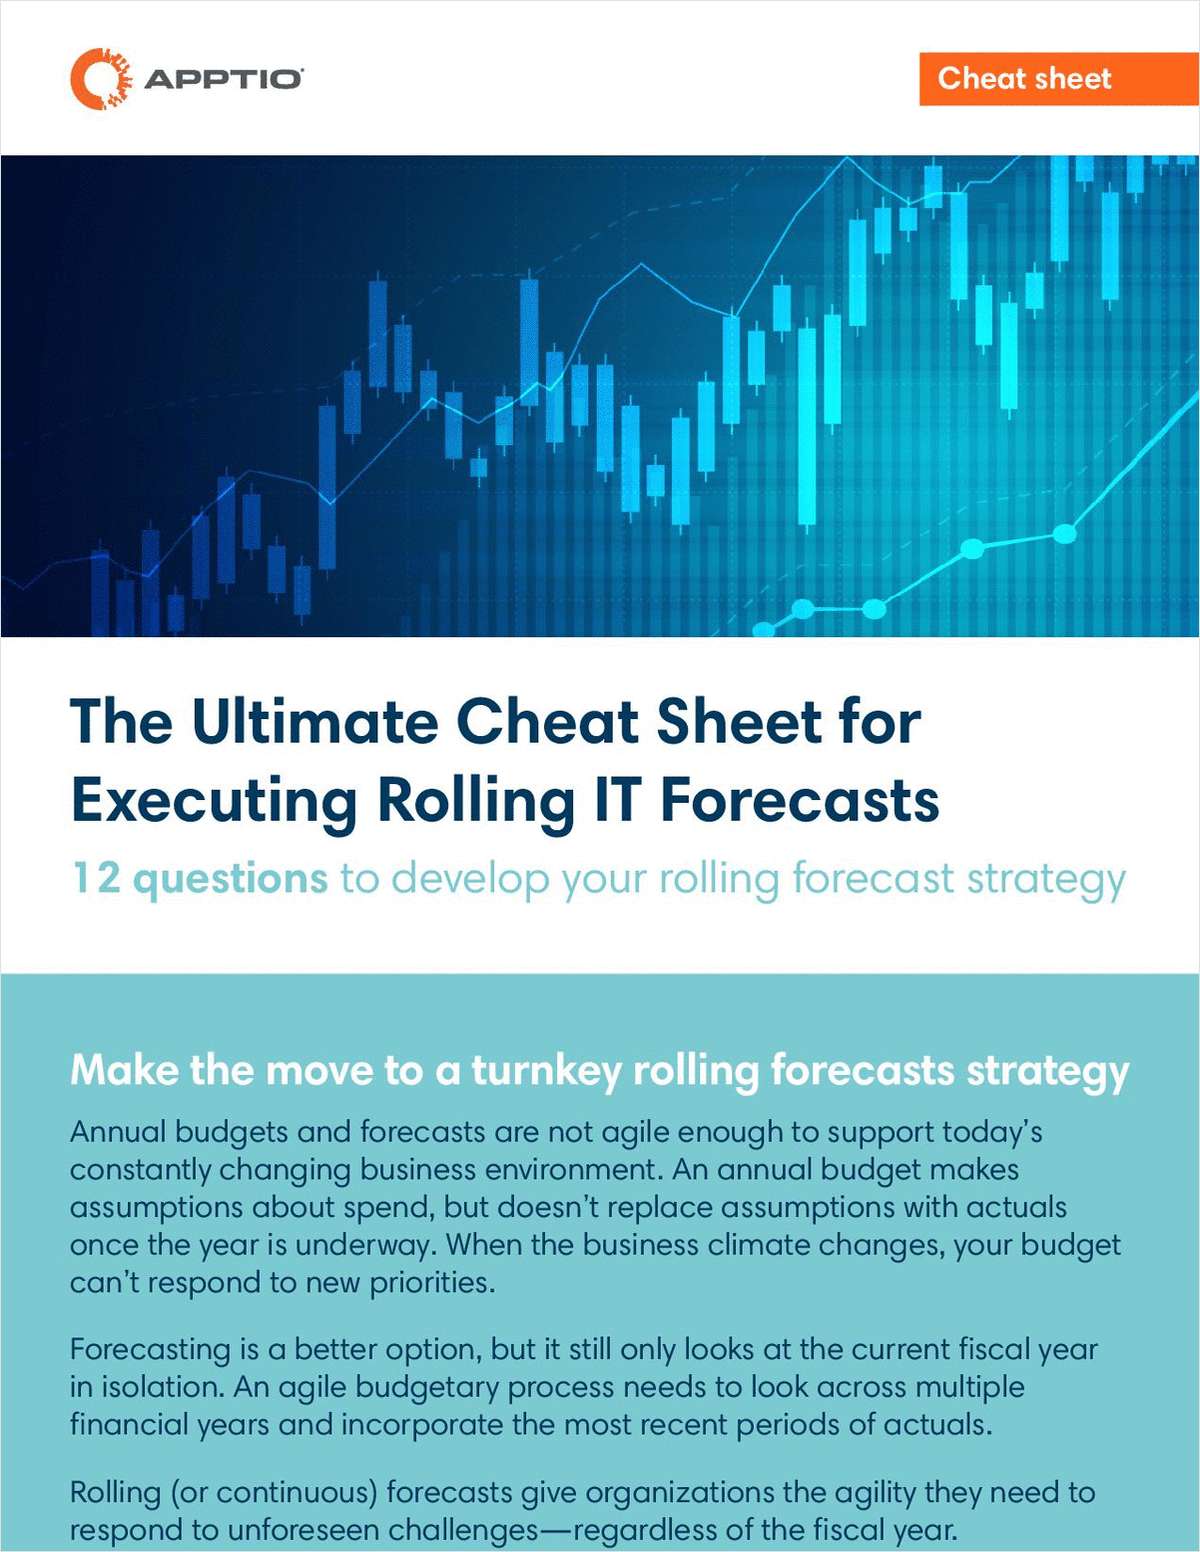 The ultimate cheatsheet for executing rolling IT Forecasts